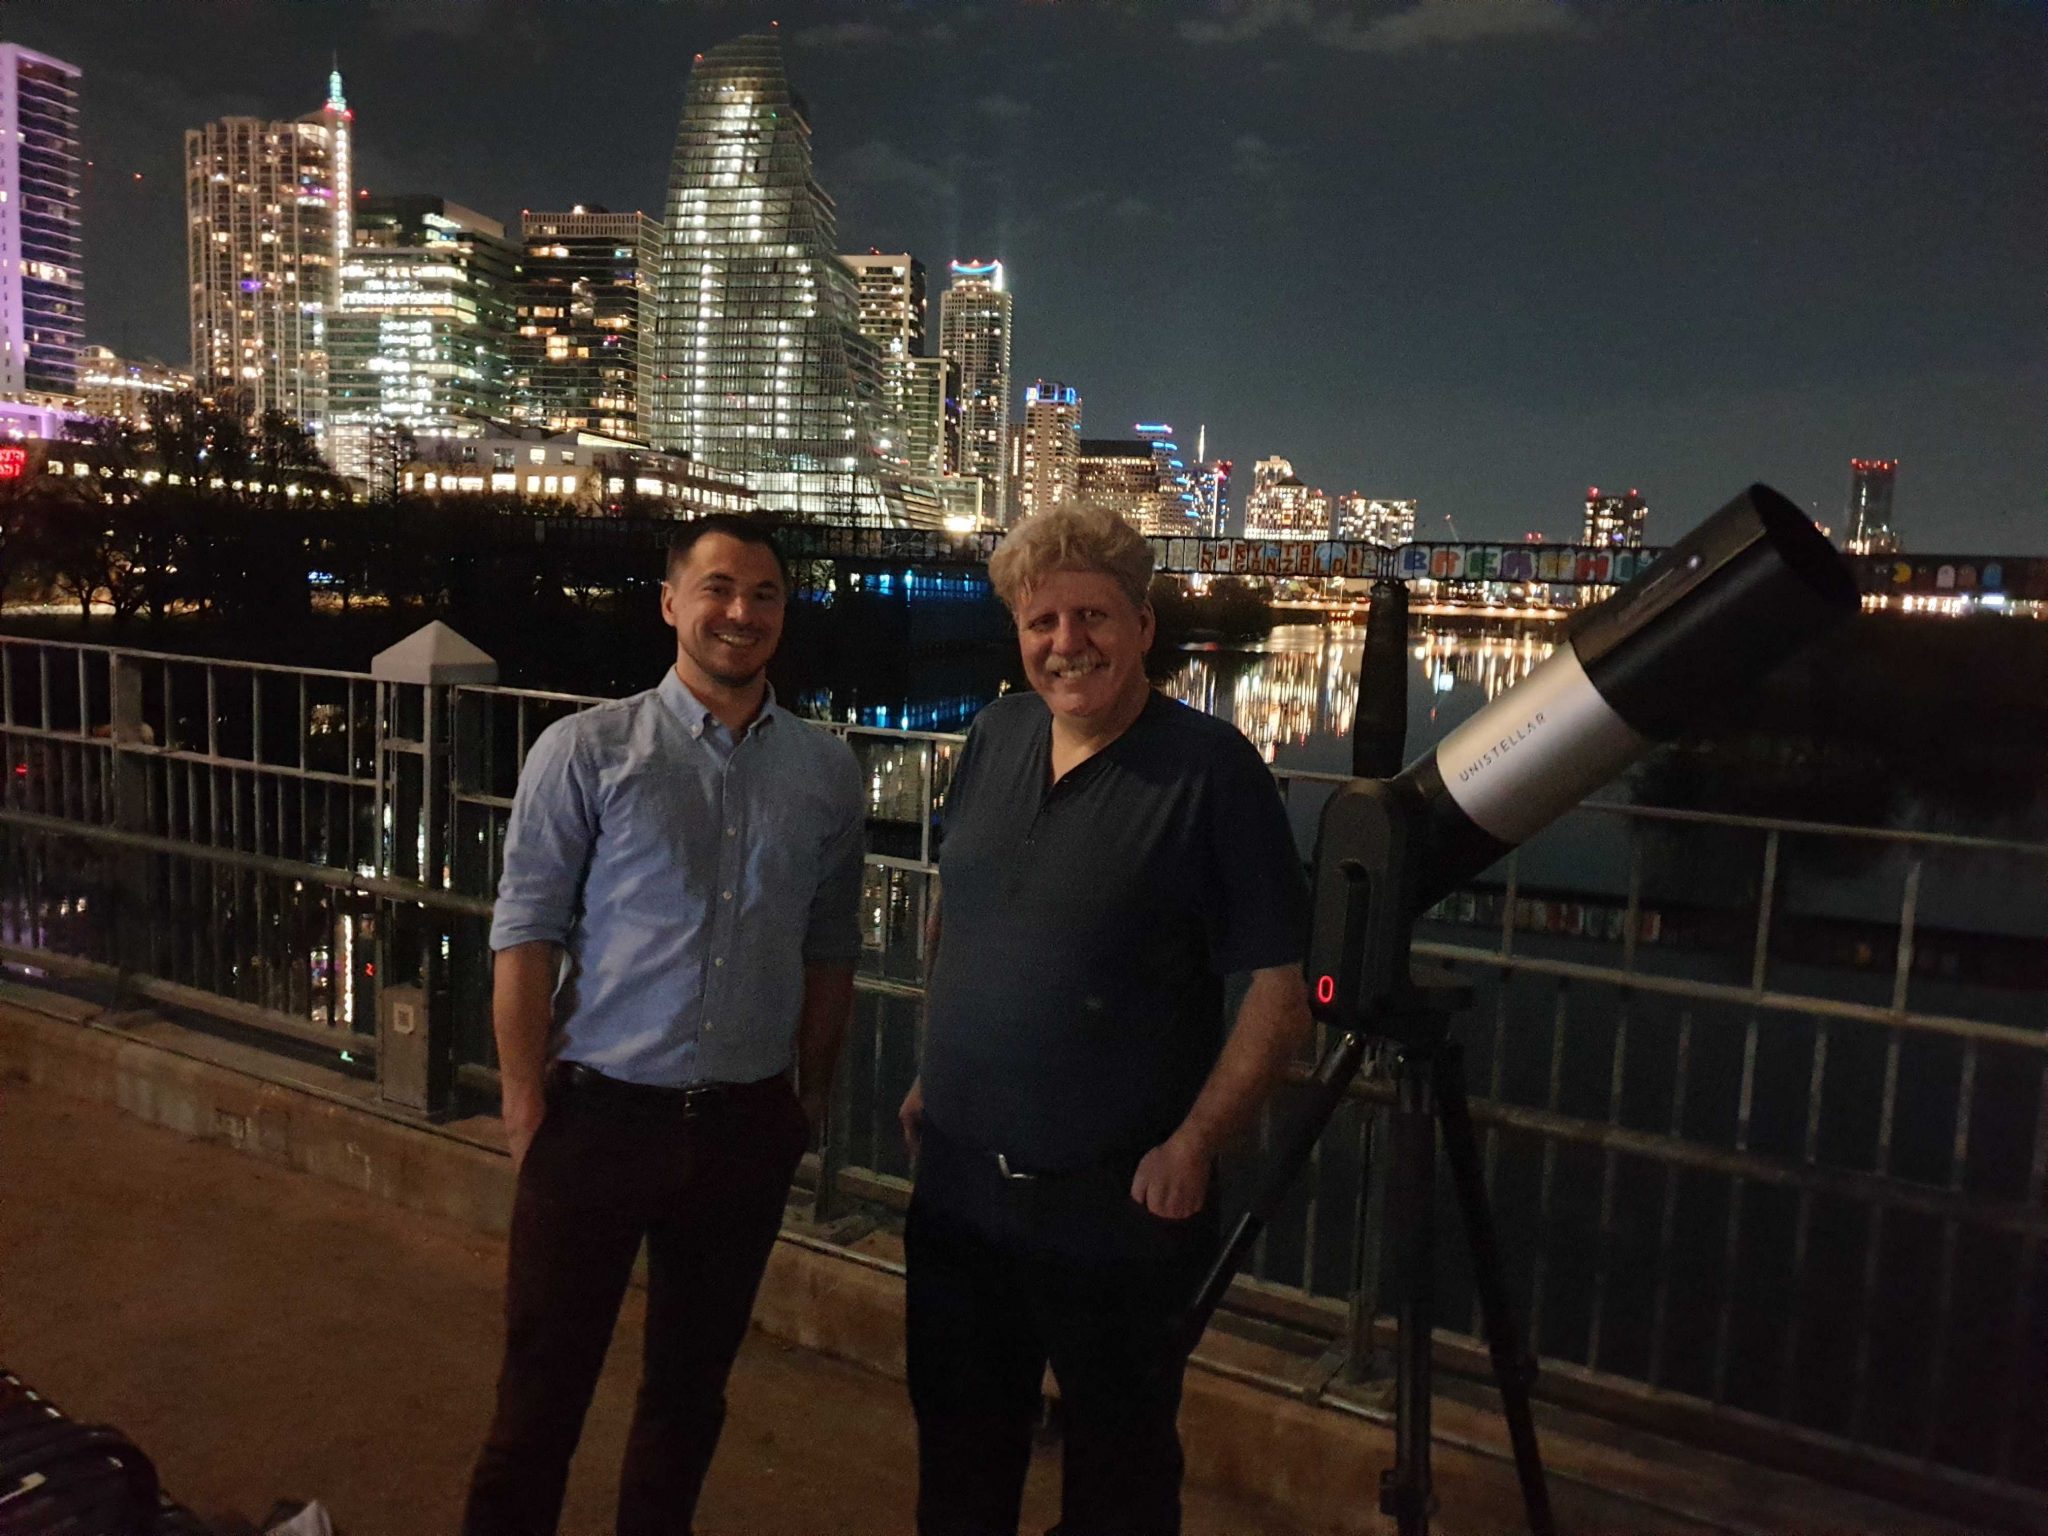 Tom Esposito (left), Unistellar Space Science Principal, with Mike Primm, one of the Unistellar Citizen Astronomers who detected the exoplanet transit.